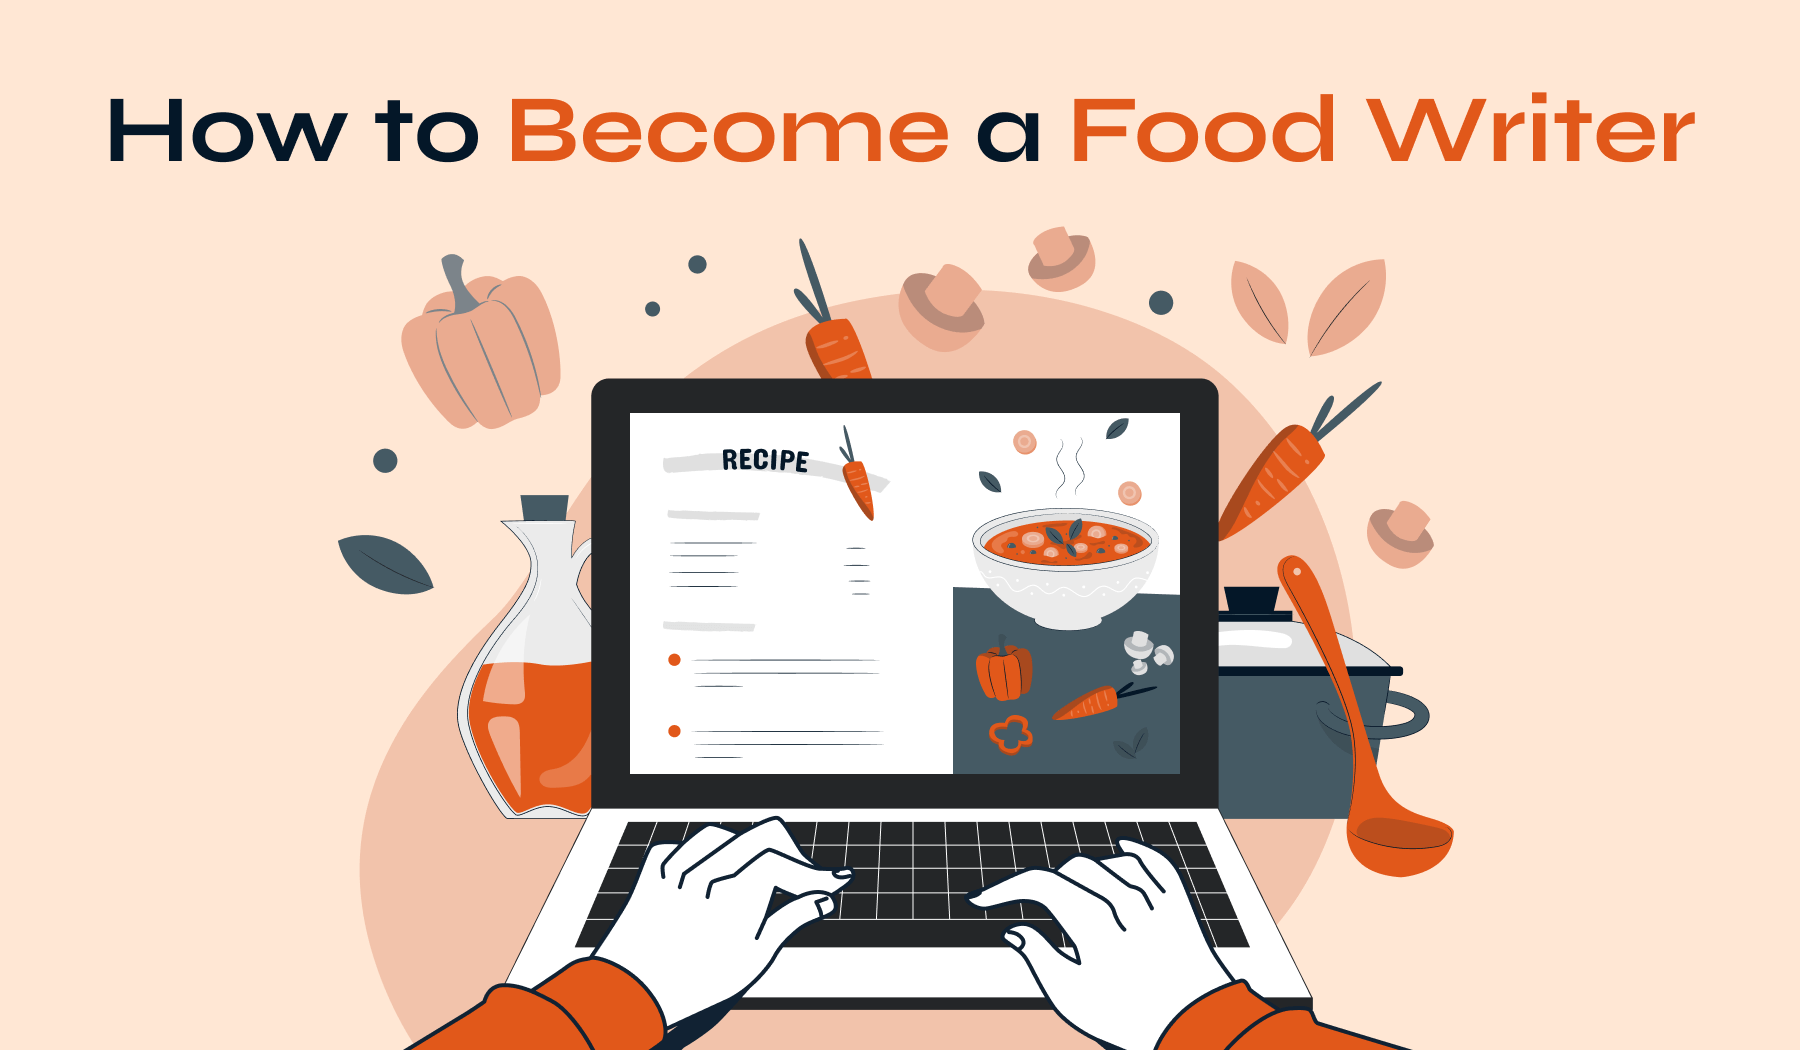 How To Become a Food Writer